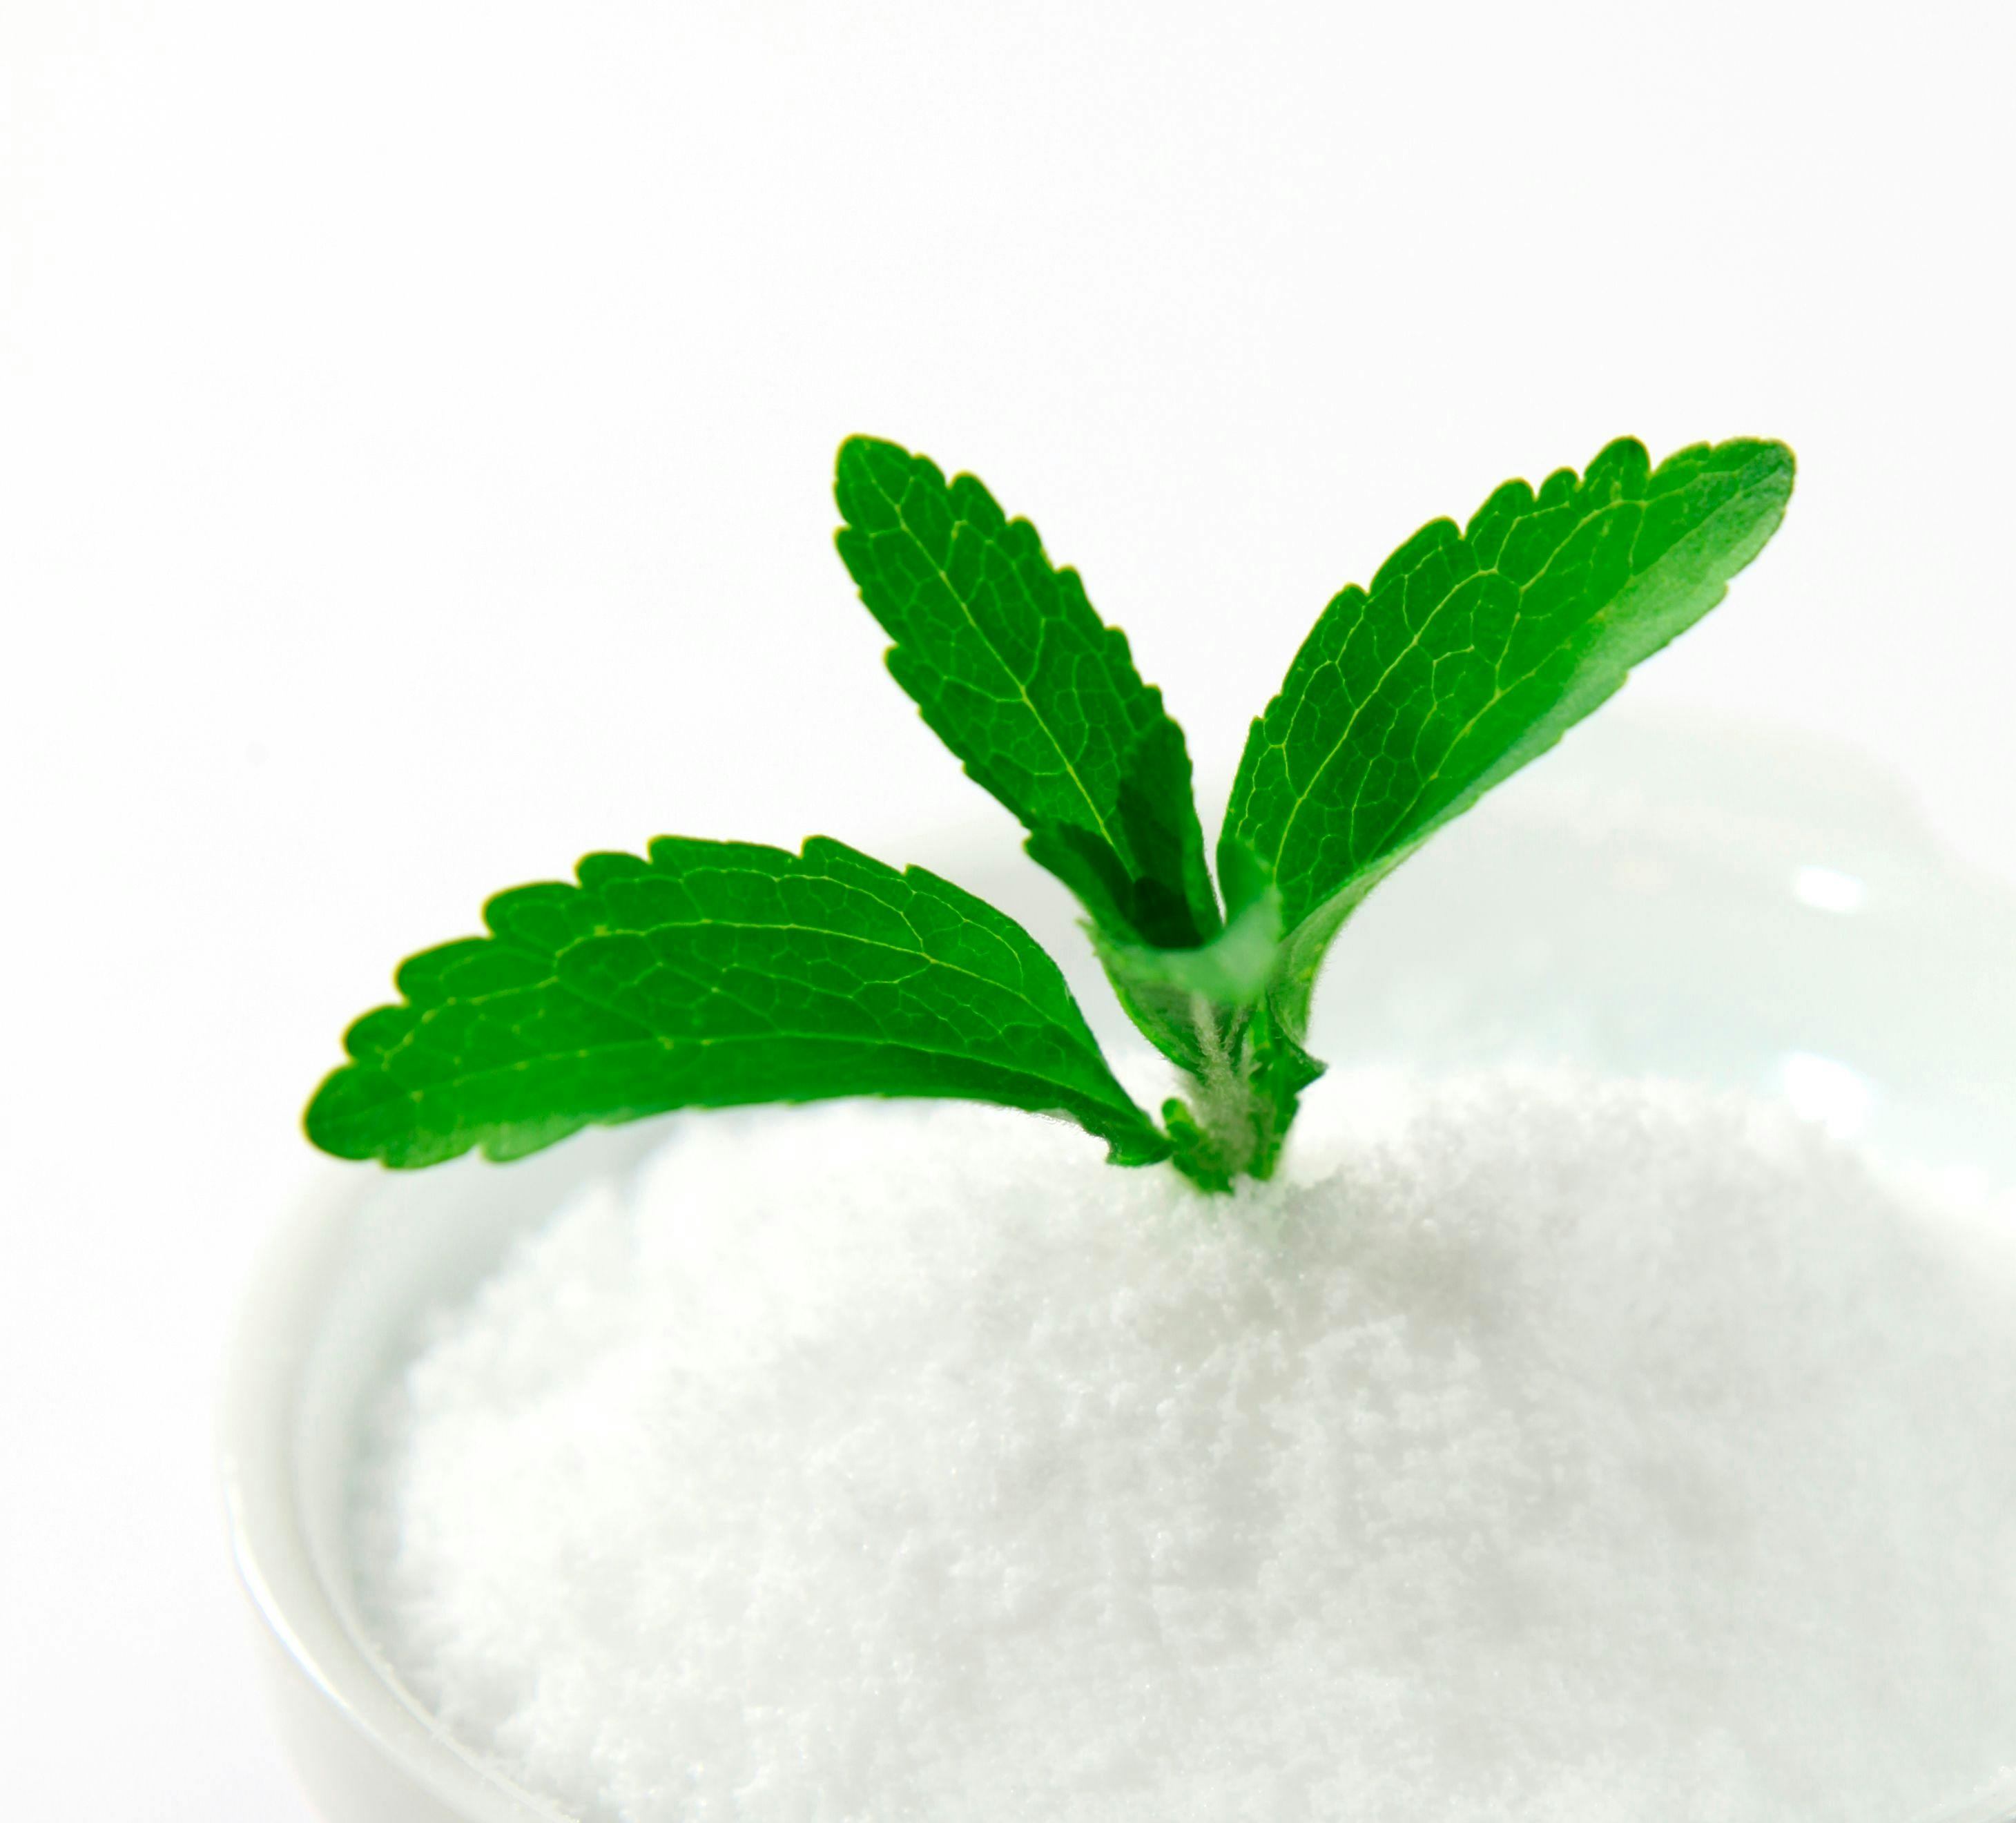 Does Reb A Still Have a Place in Advanced Stevia Formulations? This and More Stevia Talk at IFT 2016.